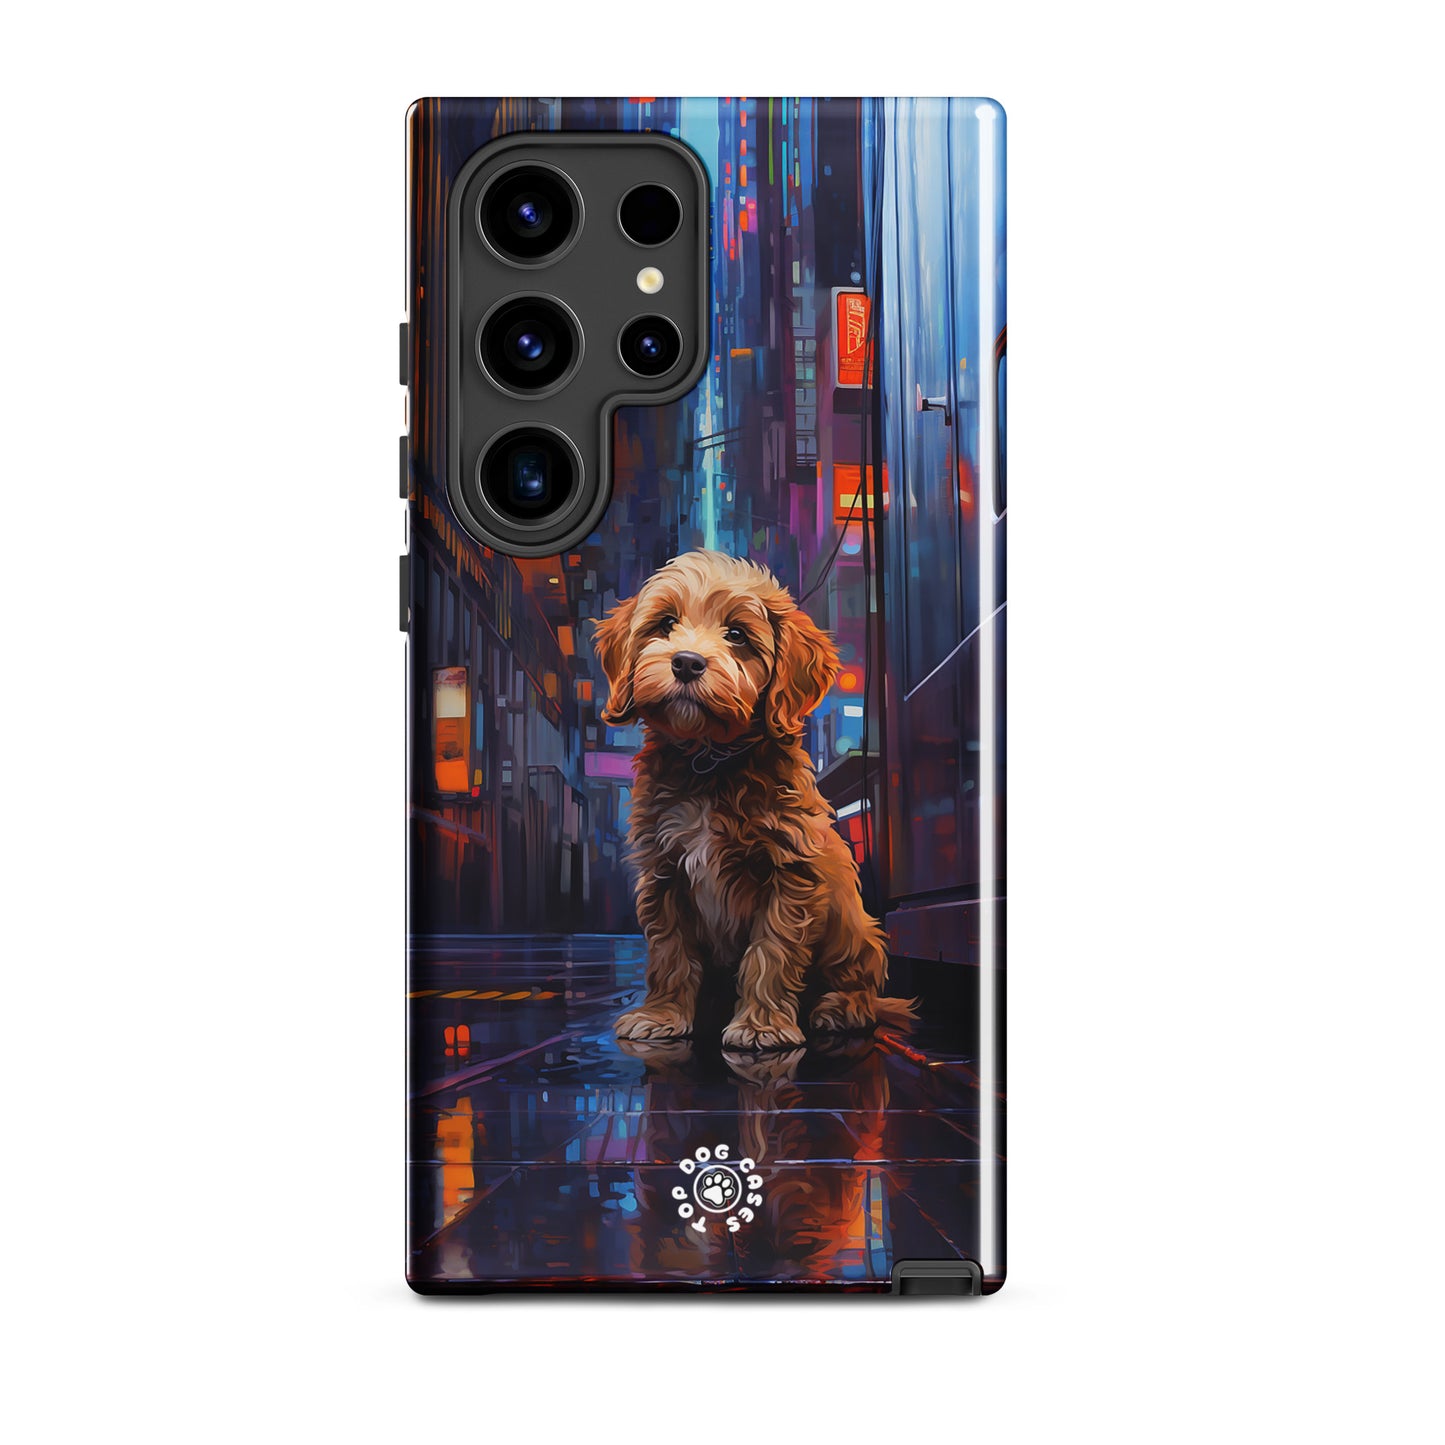 Goldendoodle in the City - Samsung Phone Case - Cute Phone Cases - Top Dog Cases - #CityDogs, #CuteDogs, #CyberpunkCityDog, #Goldendoodle, #SamsungGalaxyCase, #SamsungGalaxyS20, #SamsungGalaxyS21, #SamsungGalaxyS22, #SamsungGalaxyS22Ultra, #SamsungGalaxyS23, #SamsungGalaxyS23Ultra